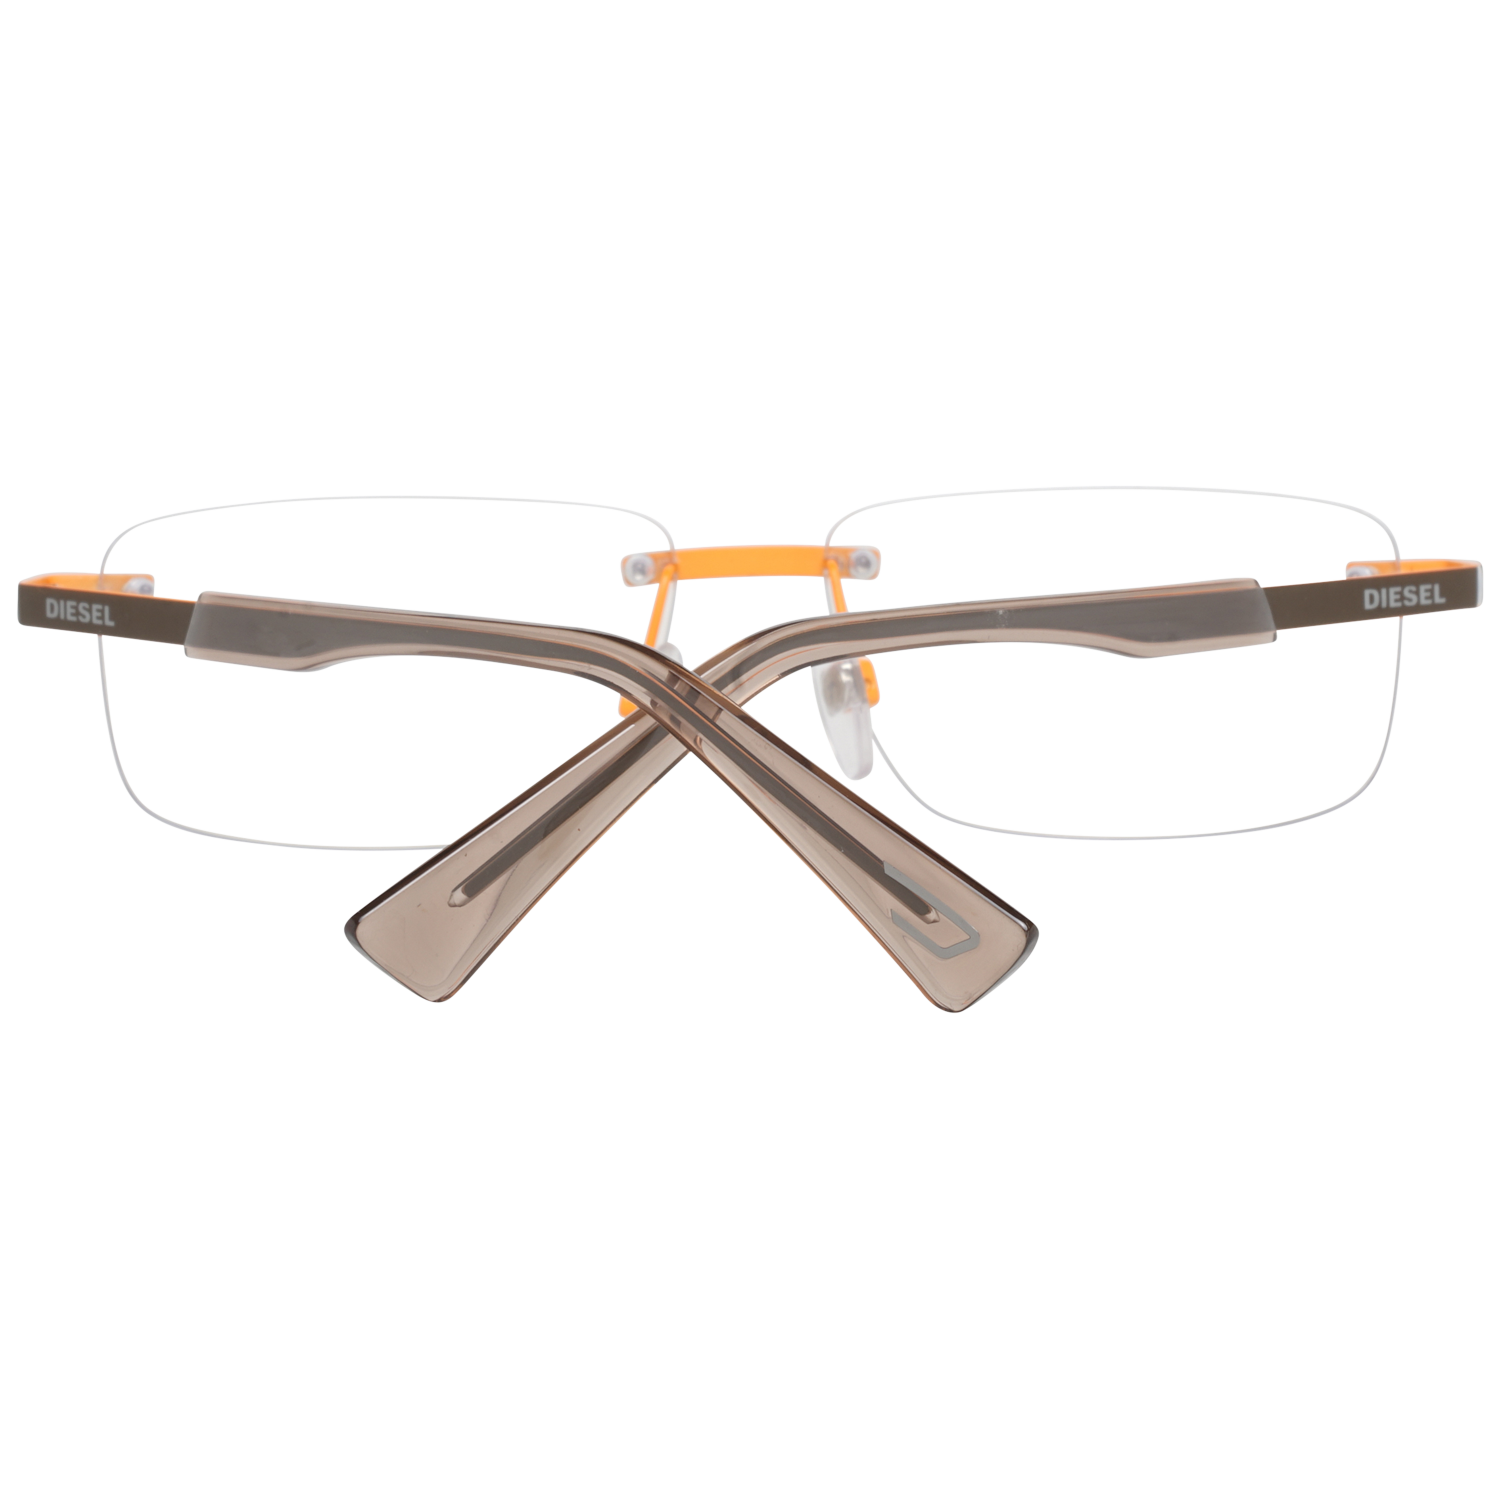 GenderMenMain colorBrownFrame colorBrownFrame materialMetalSize56-14-145Lenses width56mmLenses heigth34mmBridge length14mmFrame width136mmTemple length145mmShipment includesCase, Cleaning clothStyleRimlessSpring hingeNo